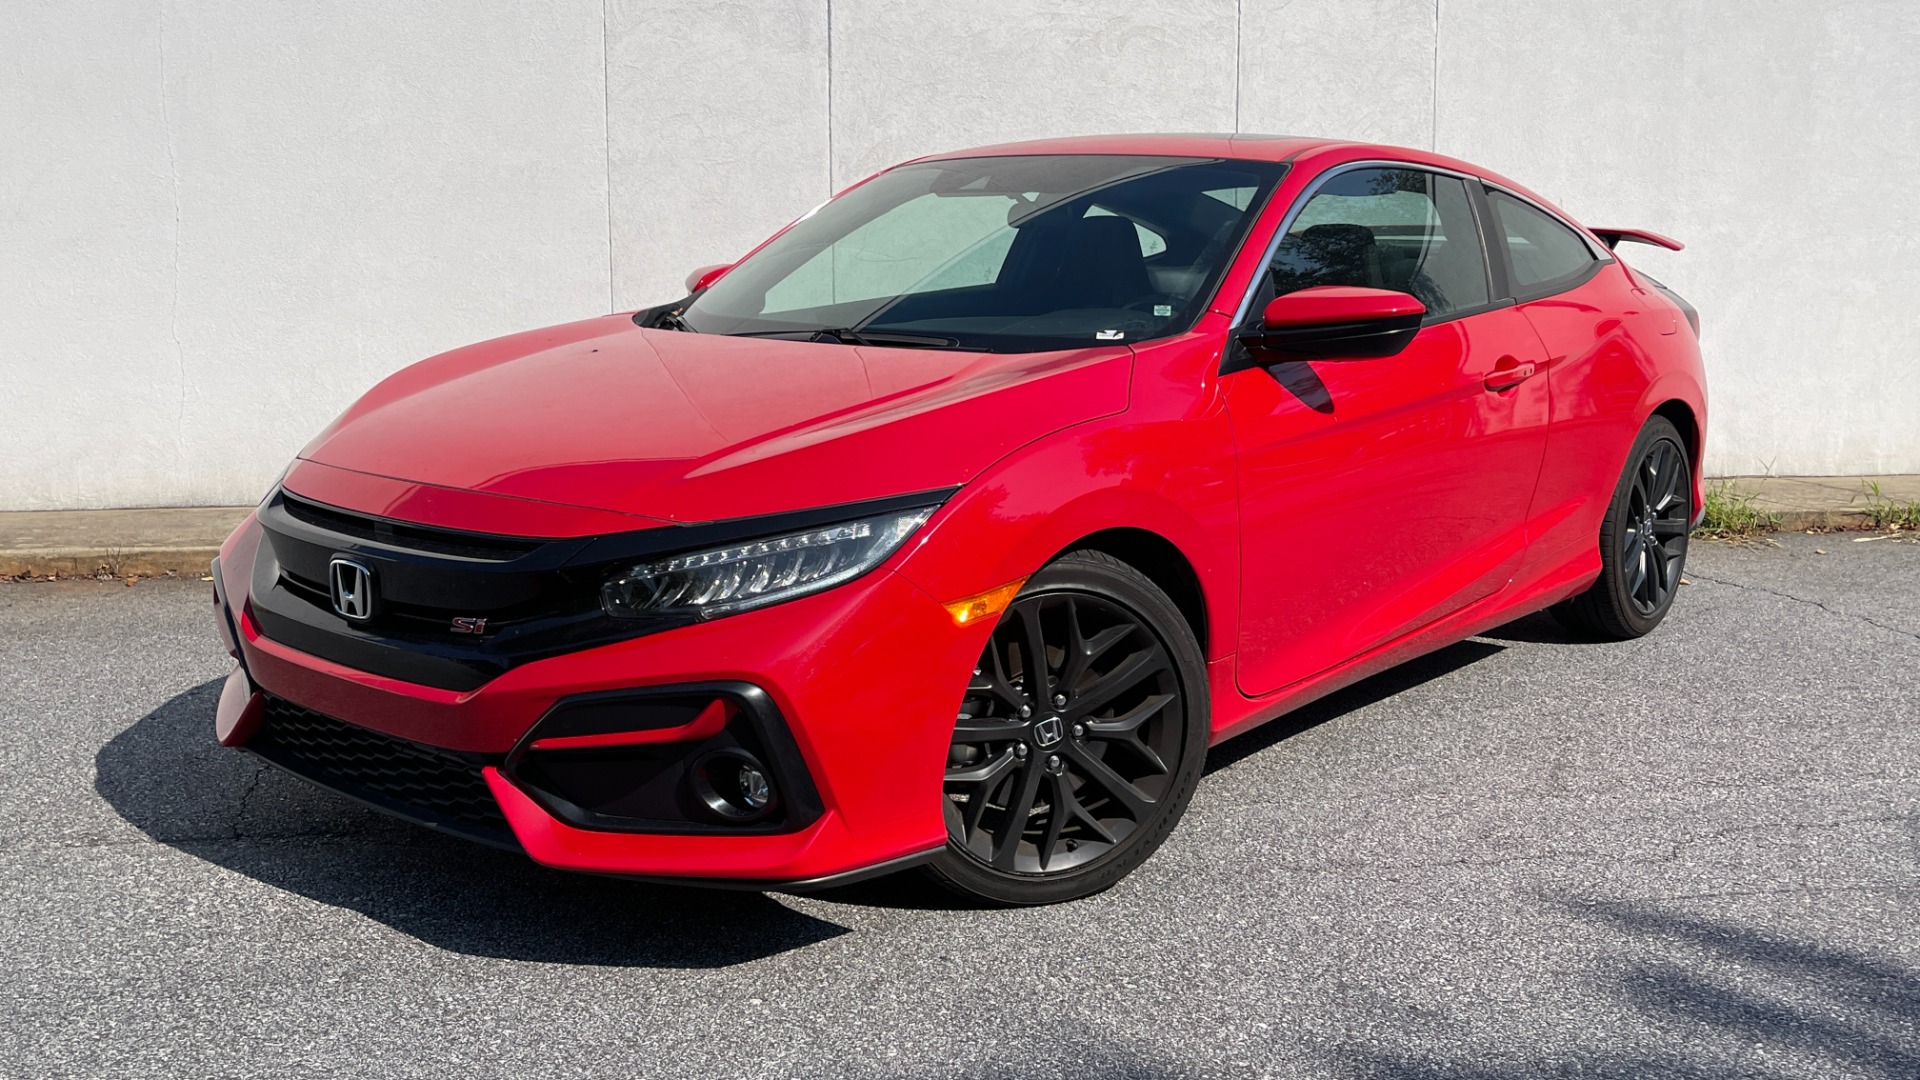 Used 2020 Honda Civic SI COUPE / 6SPEED / BACKUP CAMERA / BUCKET SEATS for sale $31,995 at Formula Imports in Charlotte NC 28227 1